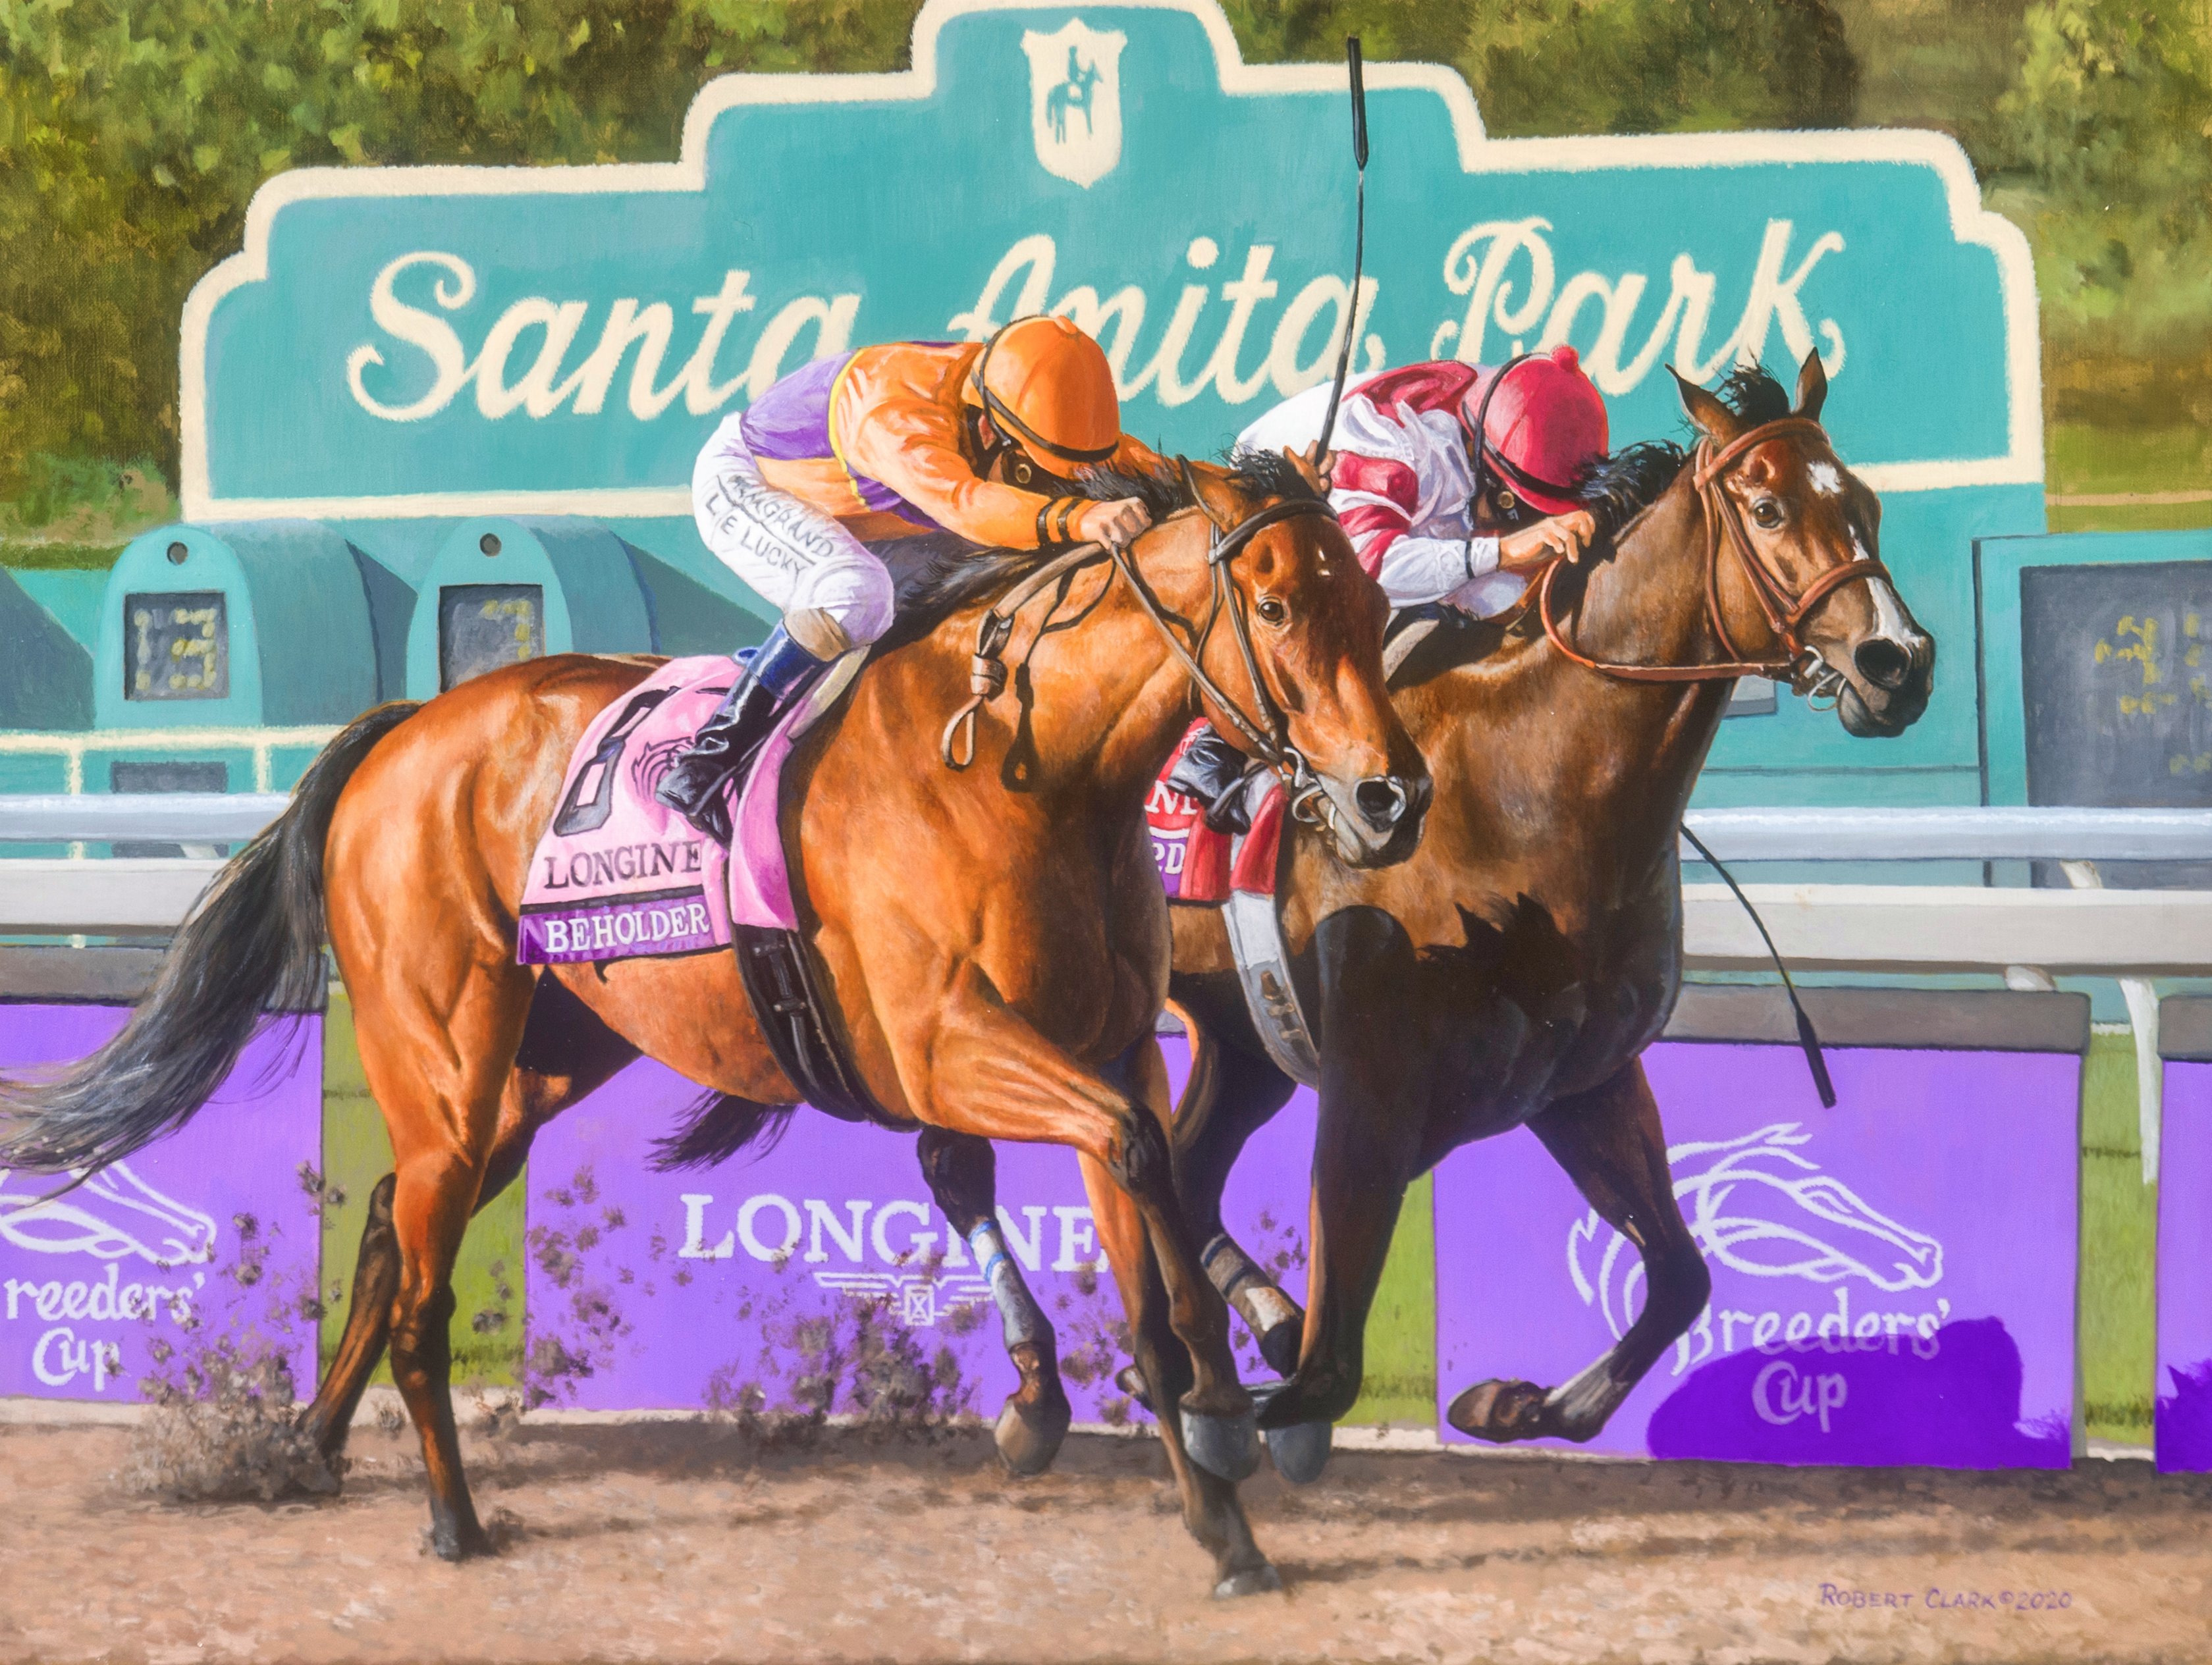 Beholder and Songbird battle to the wire in the 2016 Breeders' Cup Distaff at Santa Anita (Robert Clark)